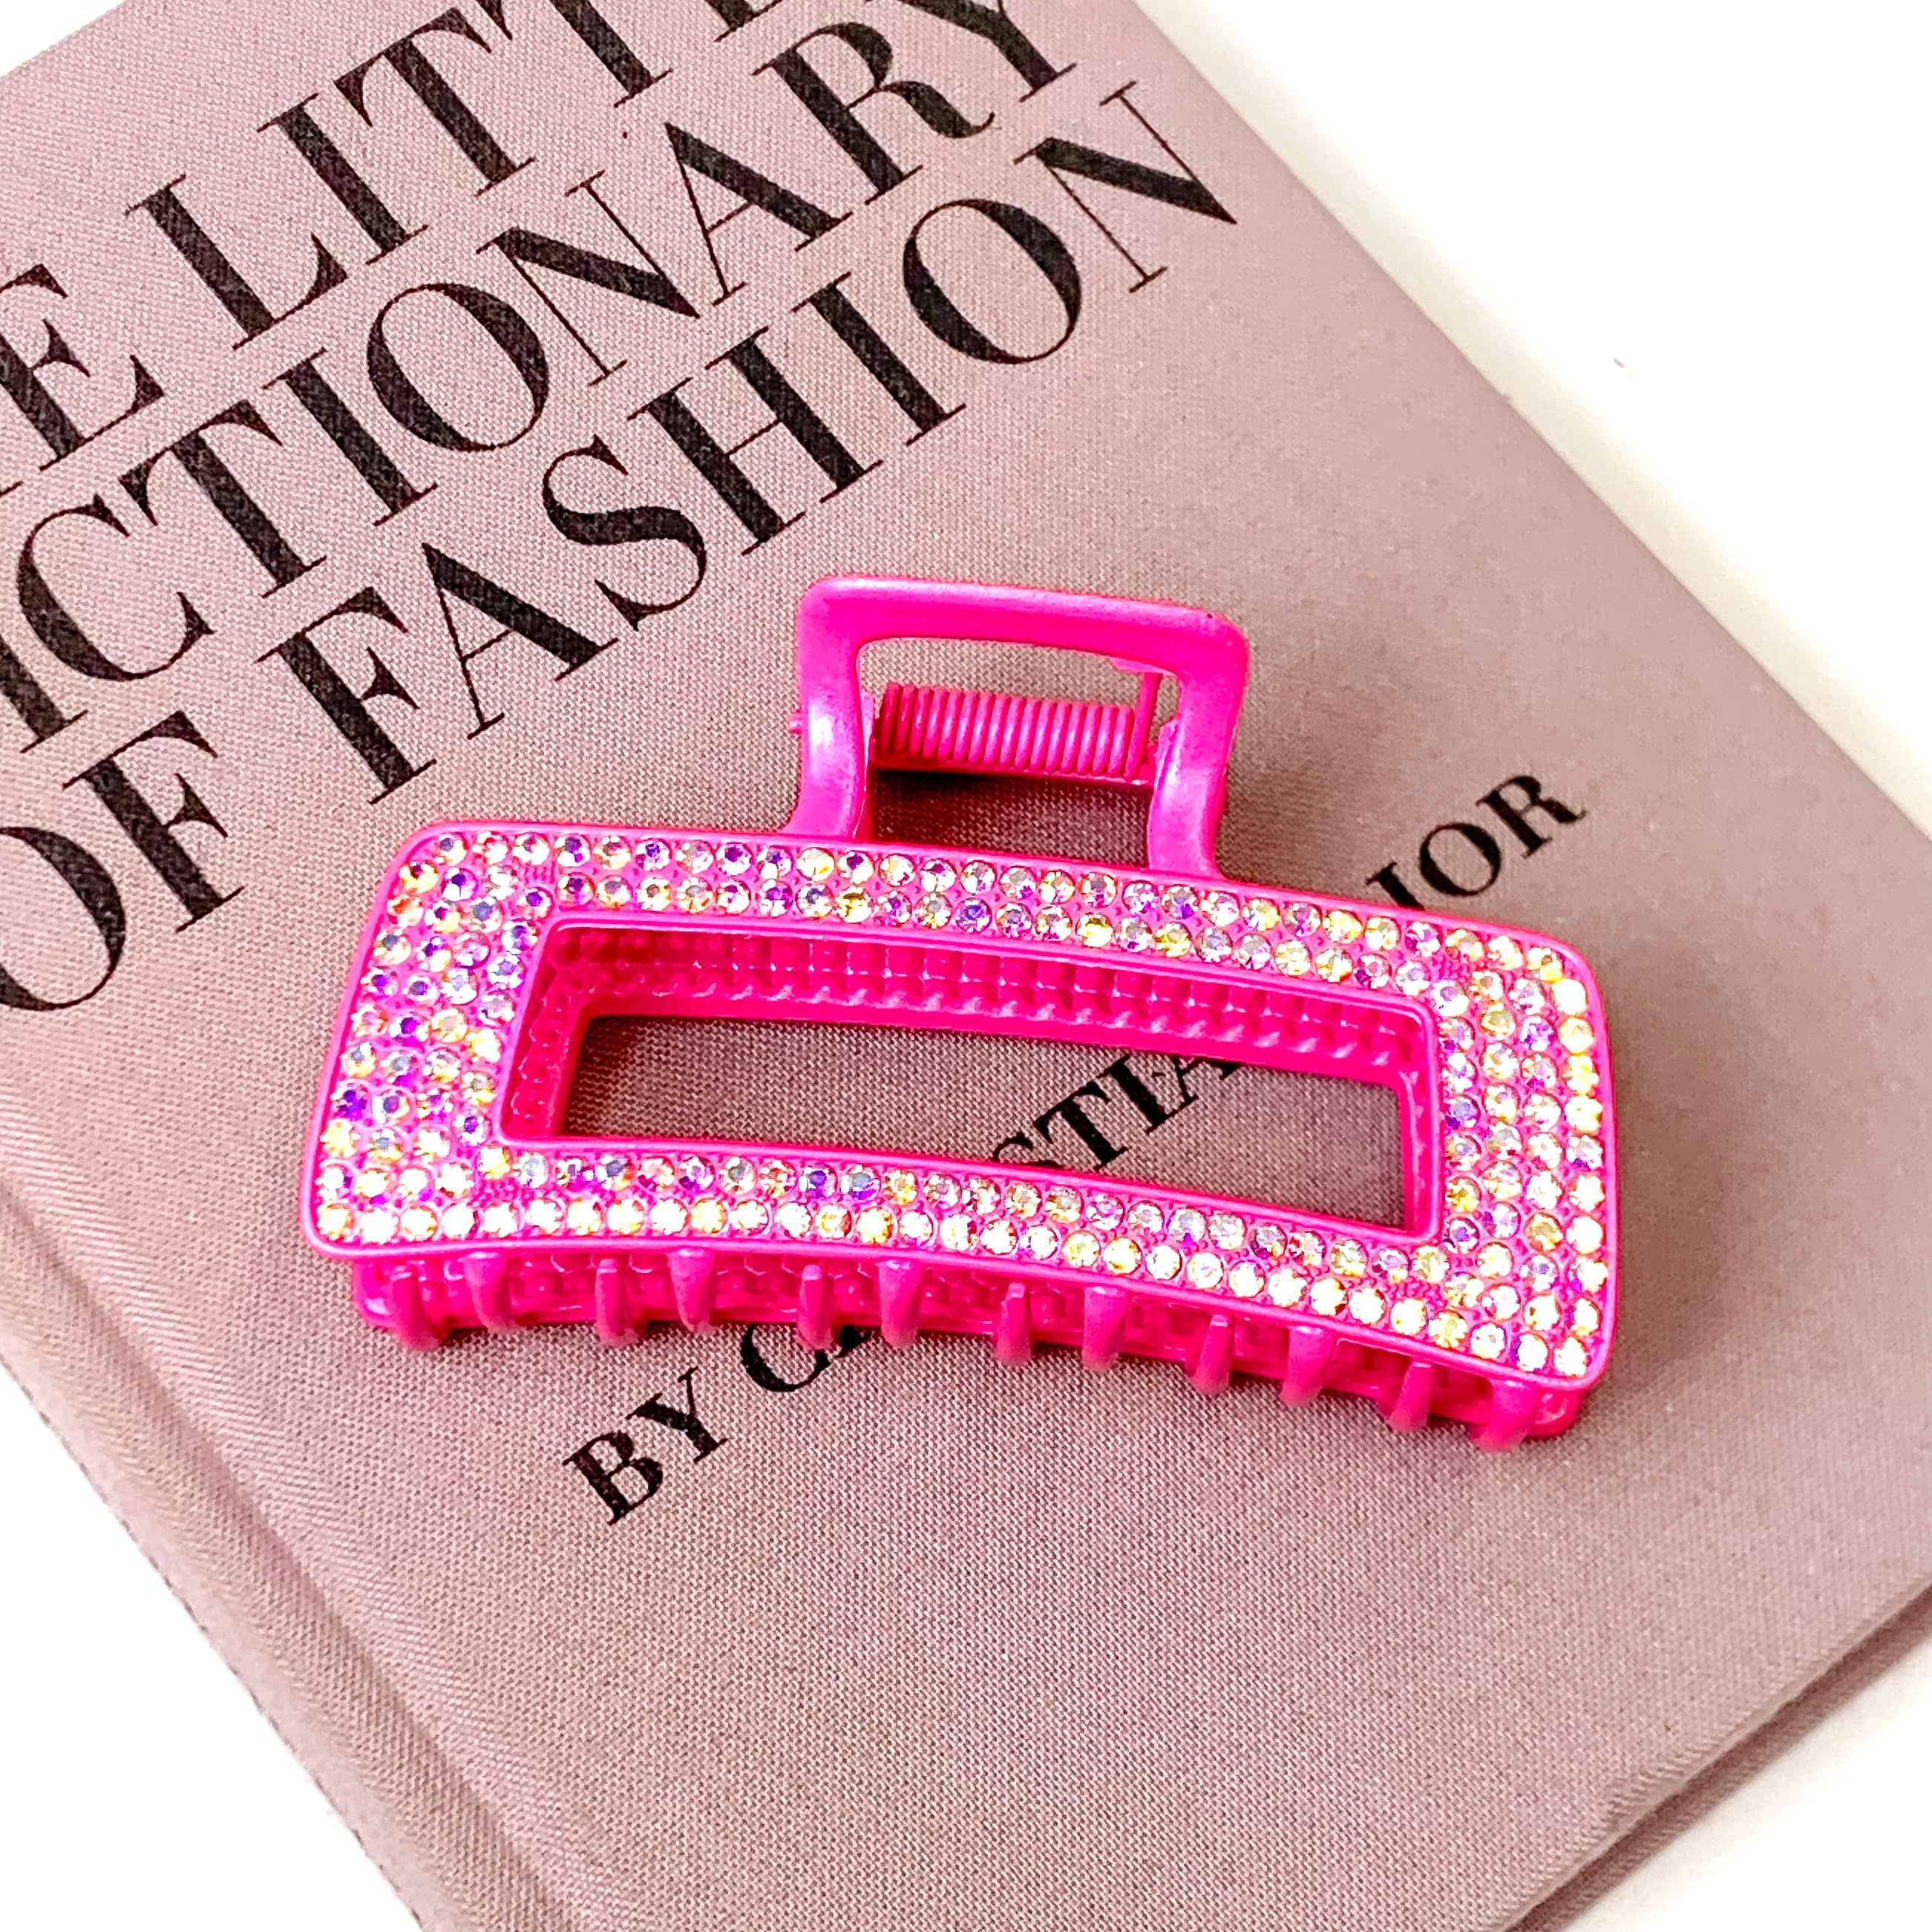 AB Crystal Embellished Metal Rectangle Hair Clip in Fuchsia Pink - Giddy Up Glamour Boutique